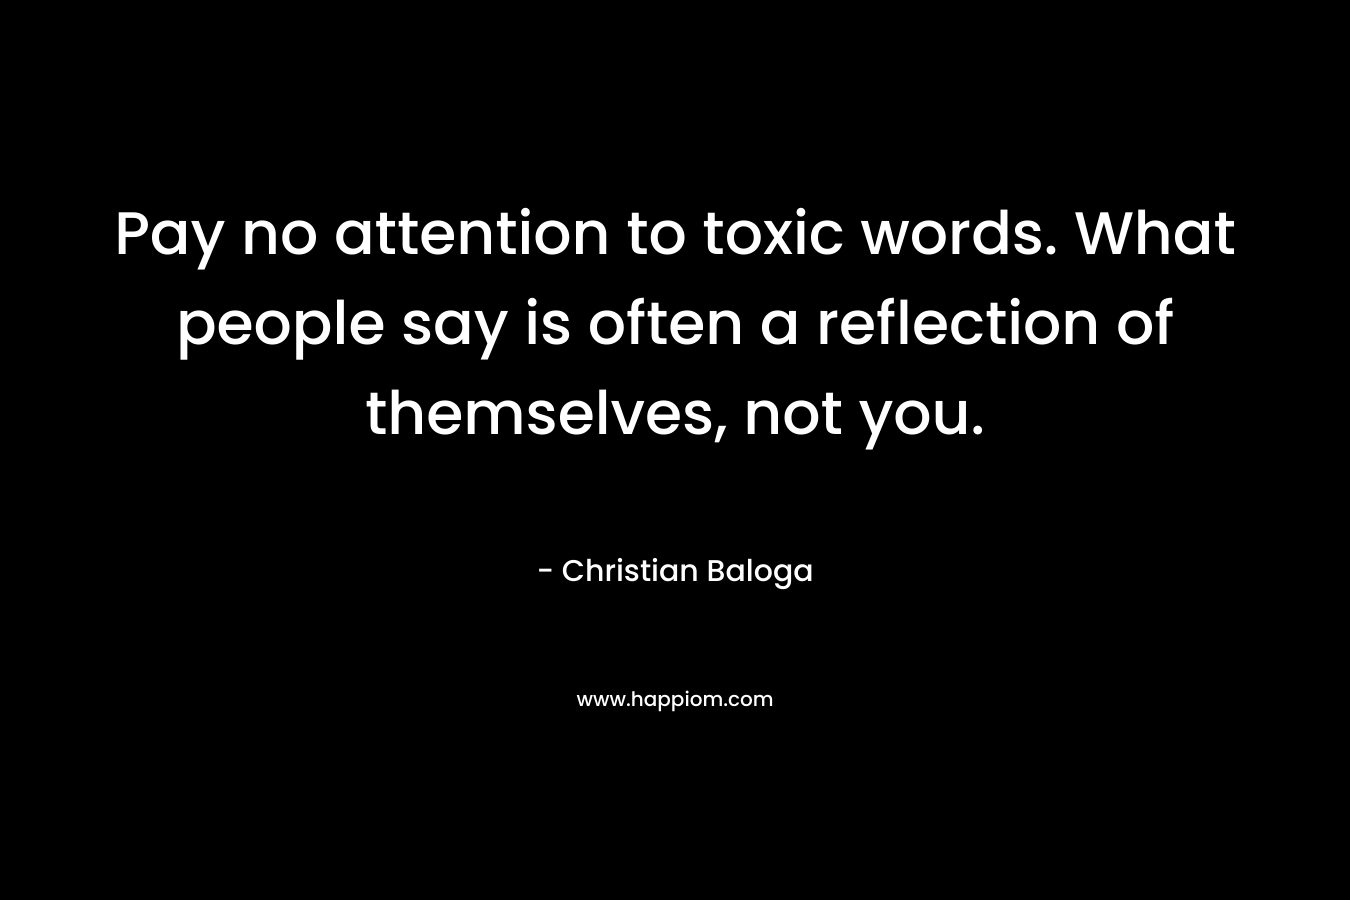 Pay no attention to toxic words. What people say is often a reflection of themselves, not you. – Christian Baloga